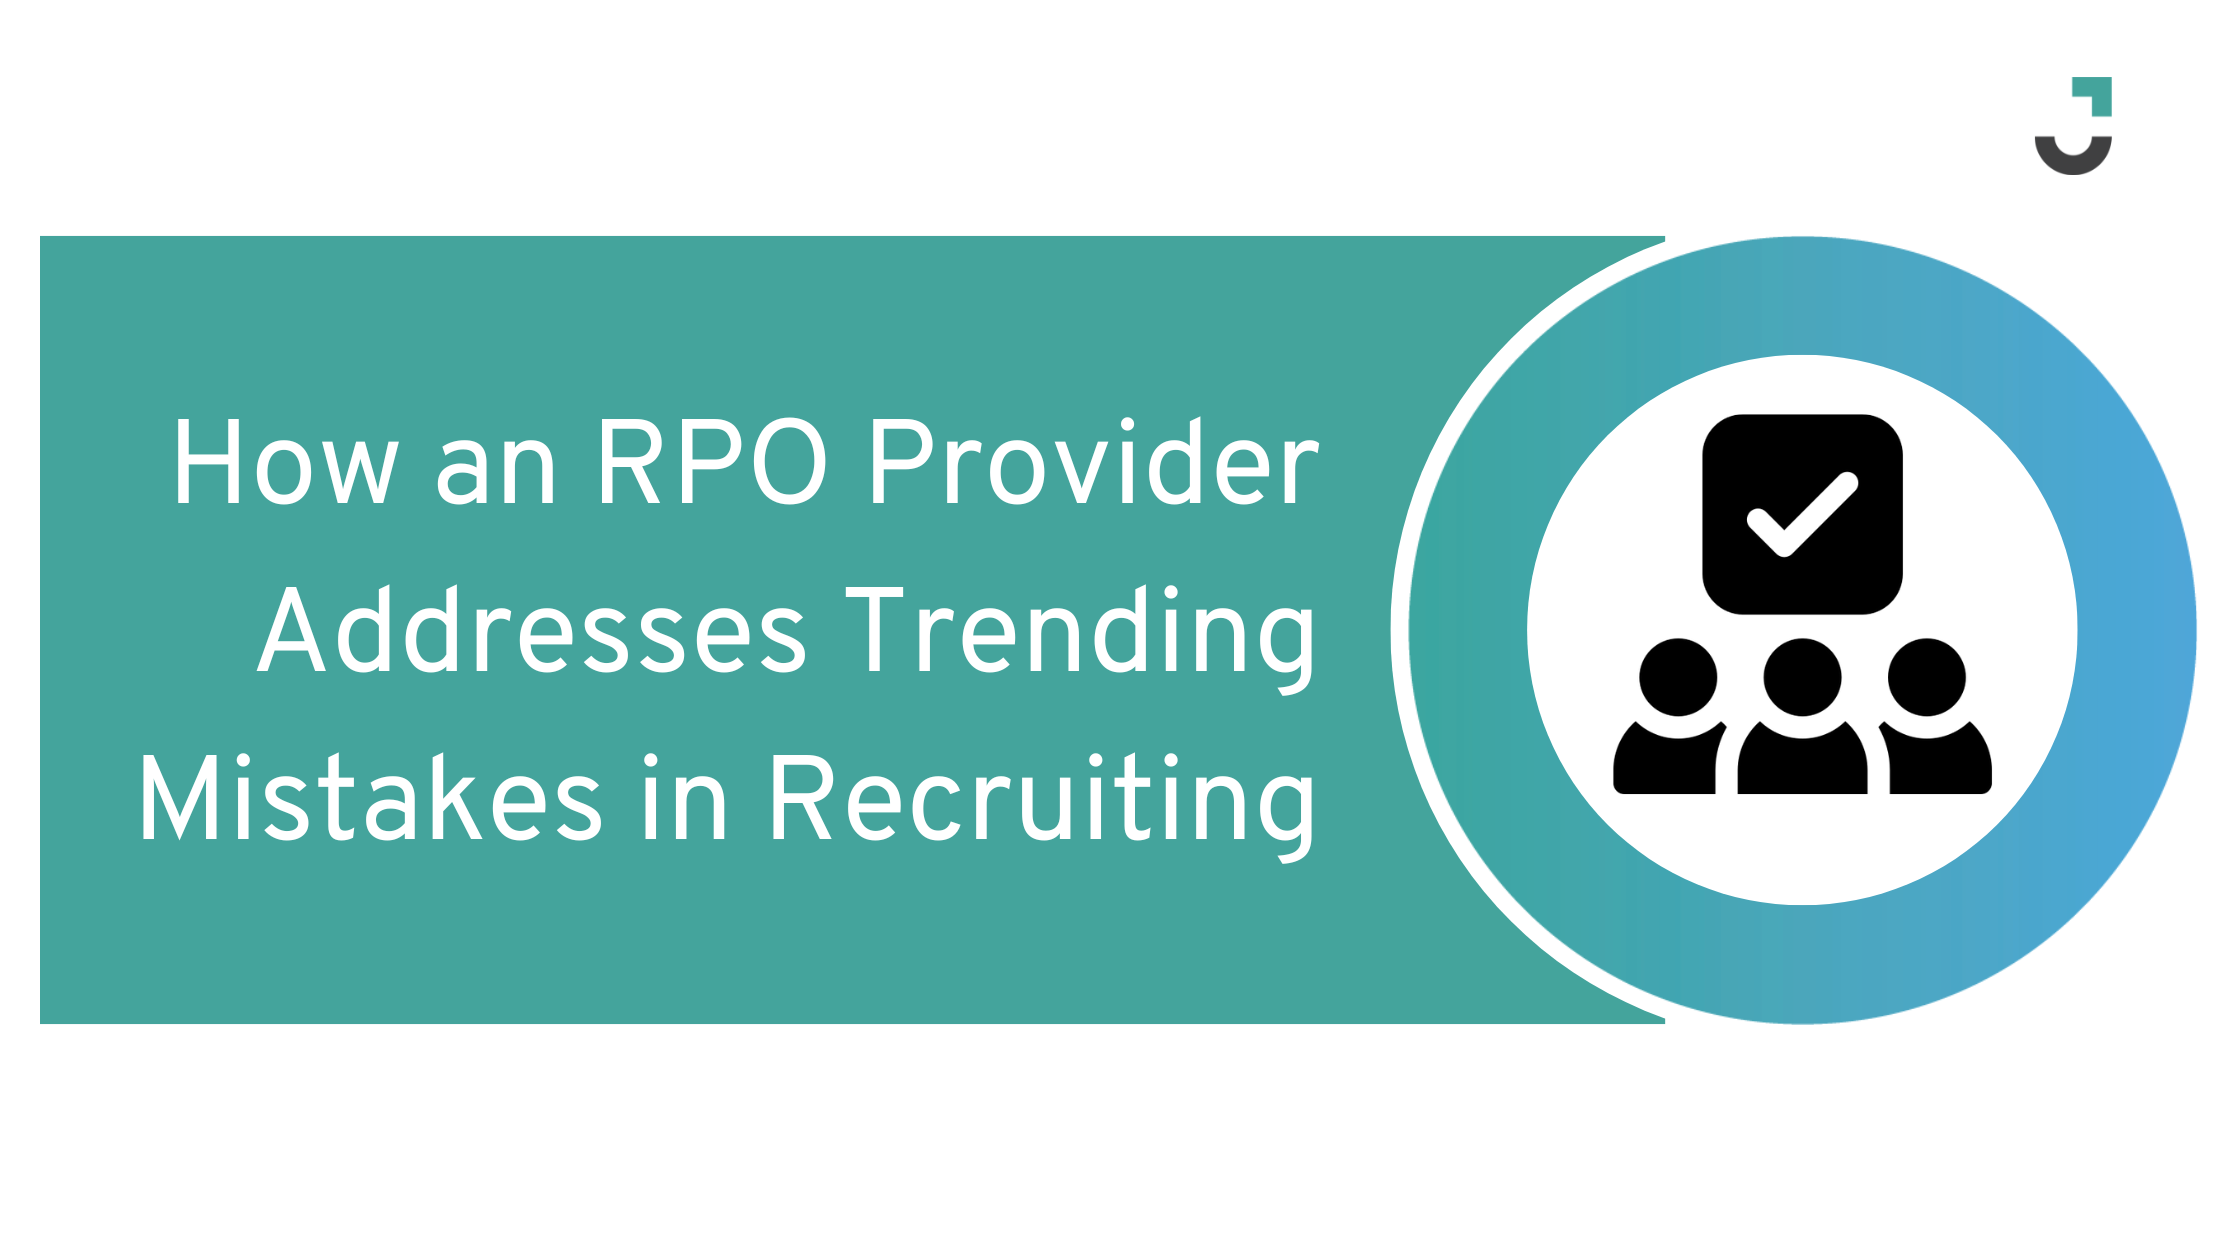 How an RPO Provider Addresses Trending Mistakes in Recruiting